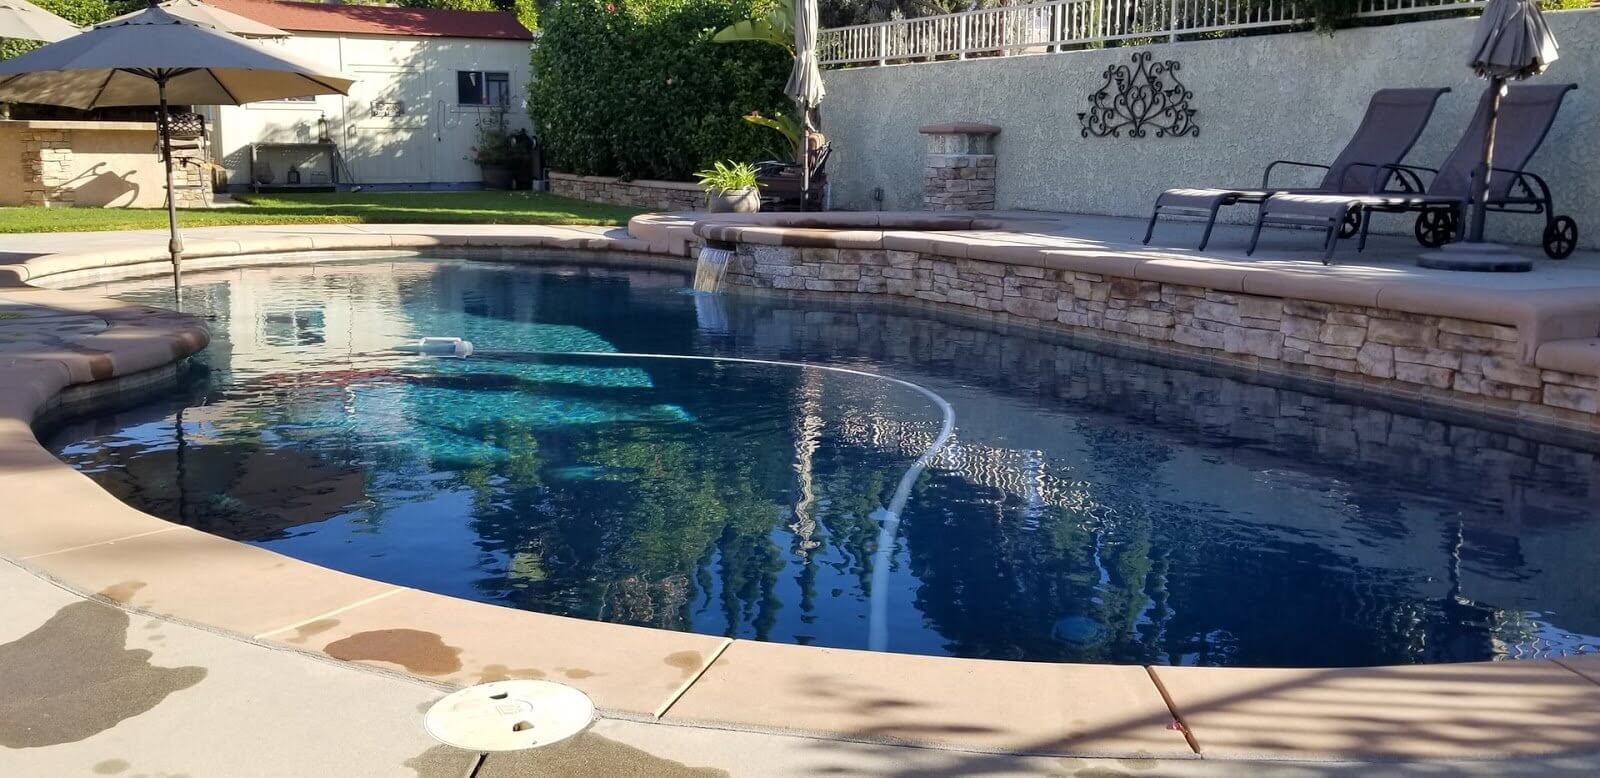 Maintain Your Pool in the Off-Season